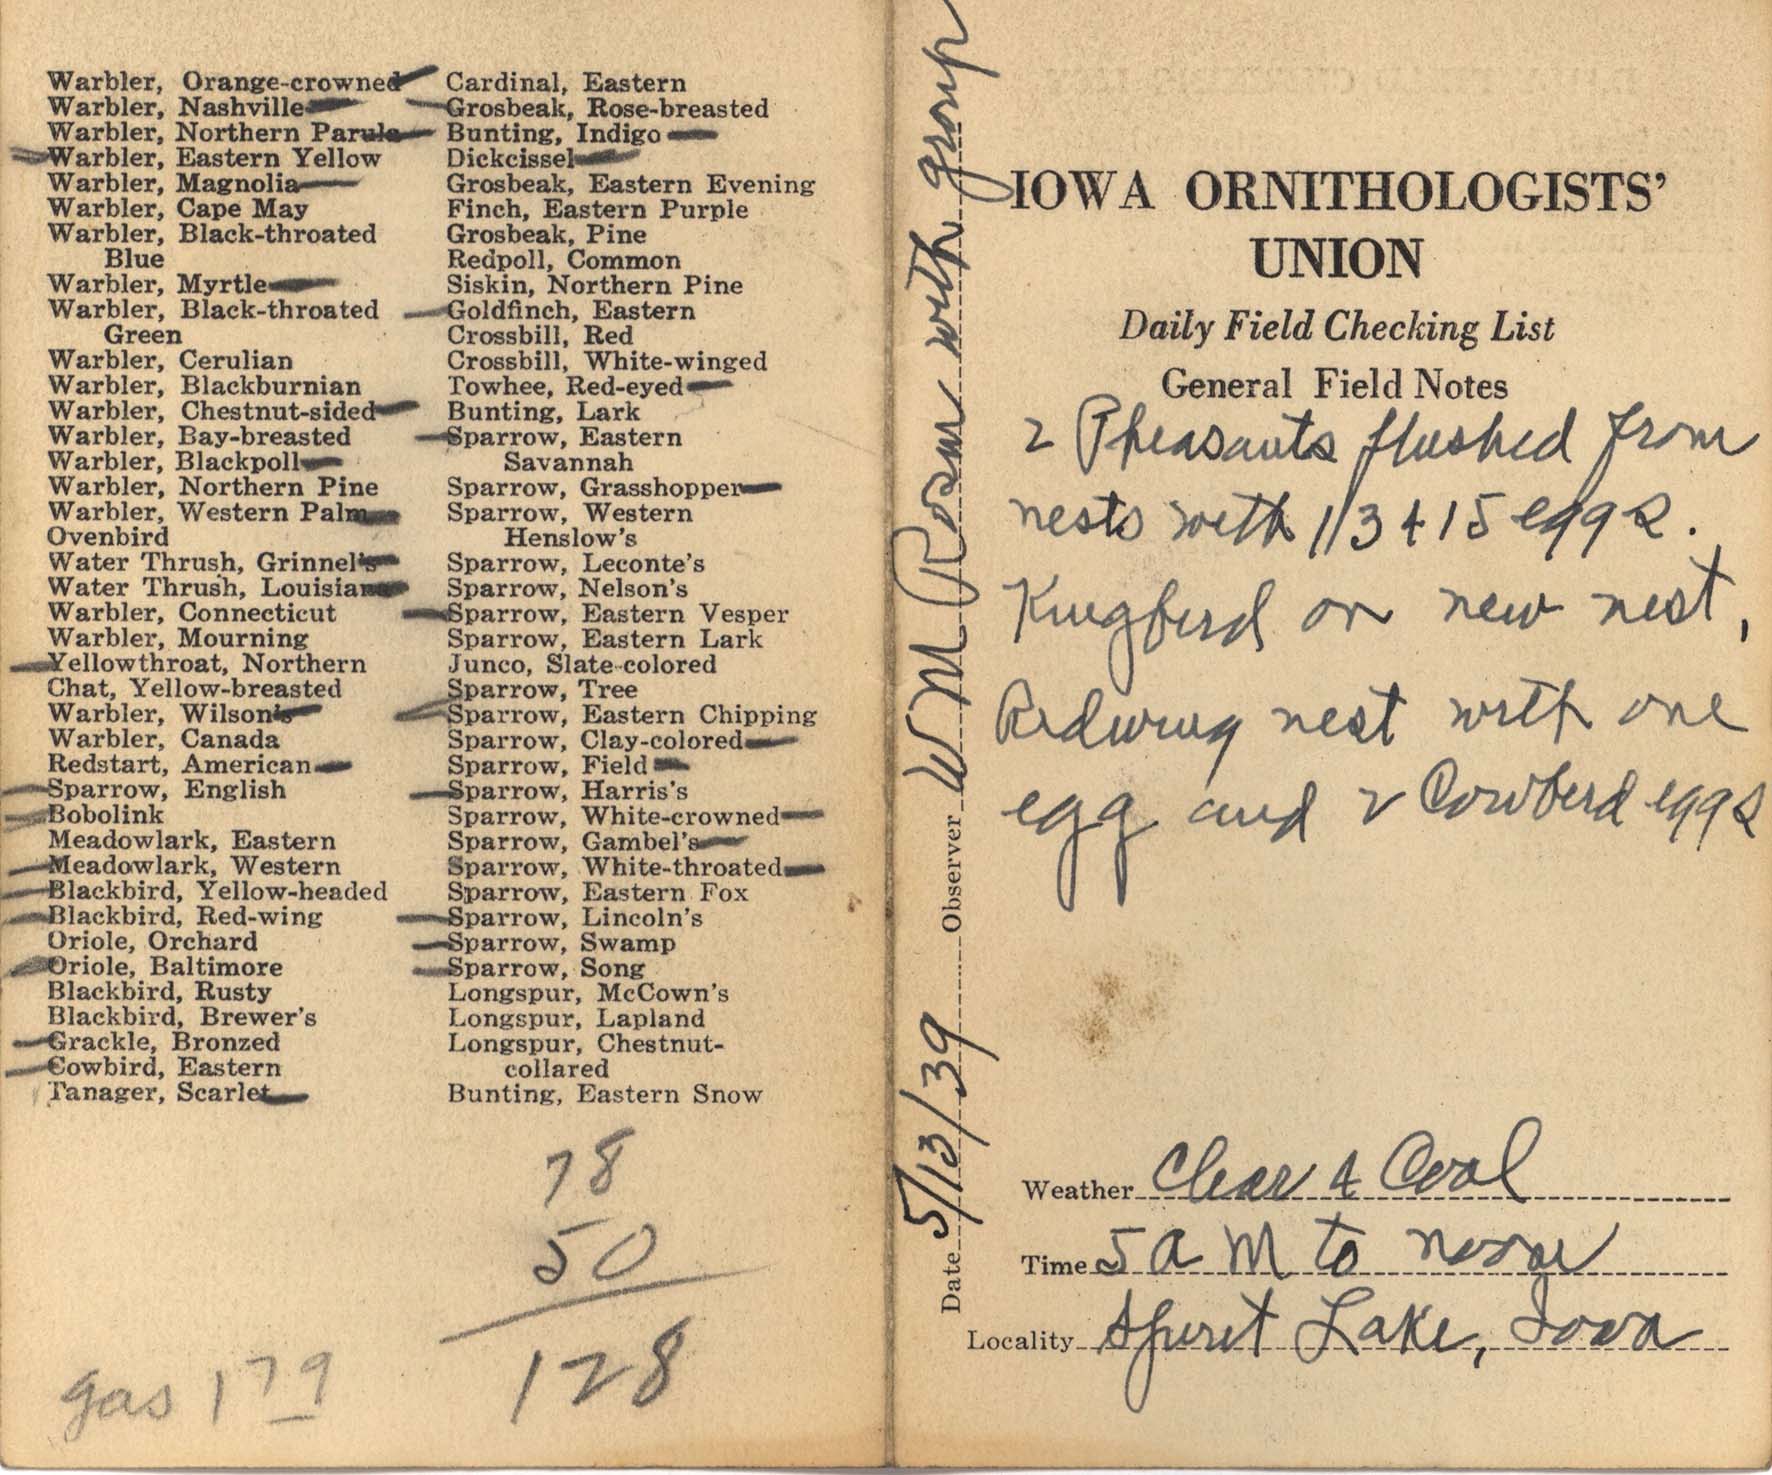 Daily field checking list by Walter Rosene, May 13, 1939